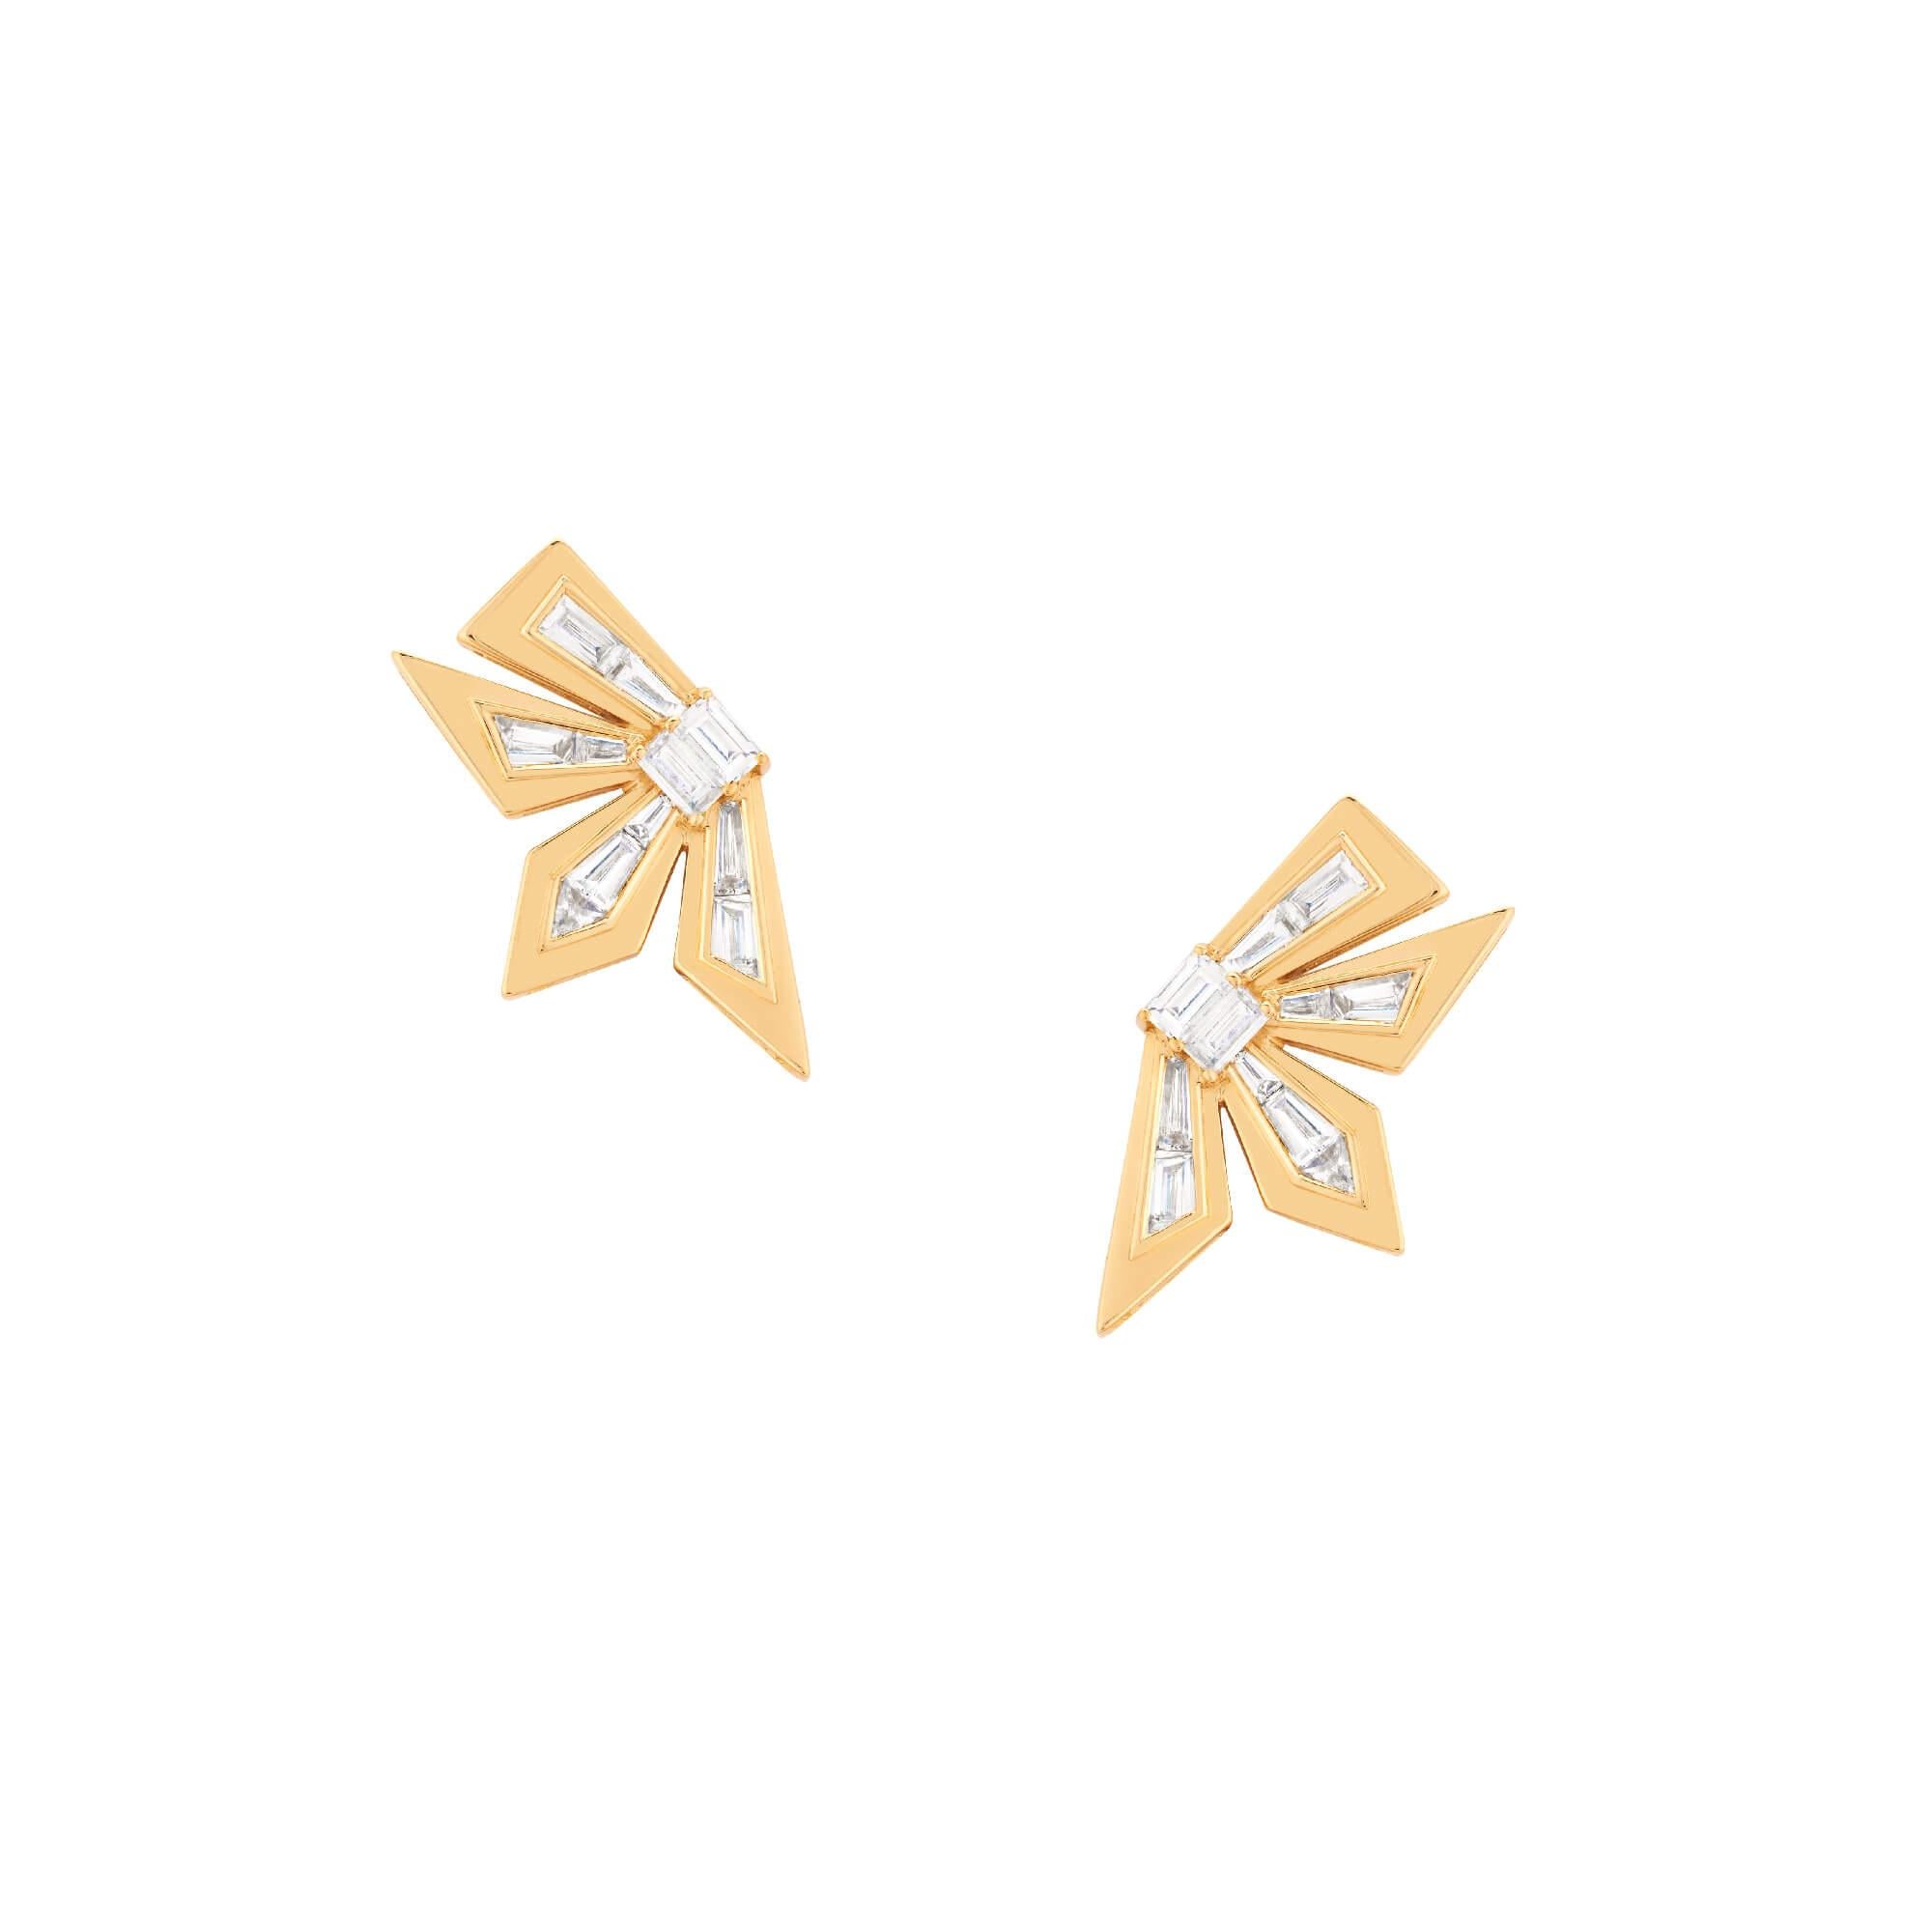 Taking inspiration from fragments of post-modern architecture, Stephen Webster presents the Dynamite Cascade Earrings set in 18 karat yellow gold, with tapered white diamond baguettes and central white diamond baguettes (1.13 carats). These unique